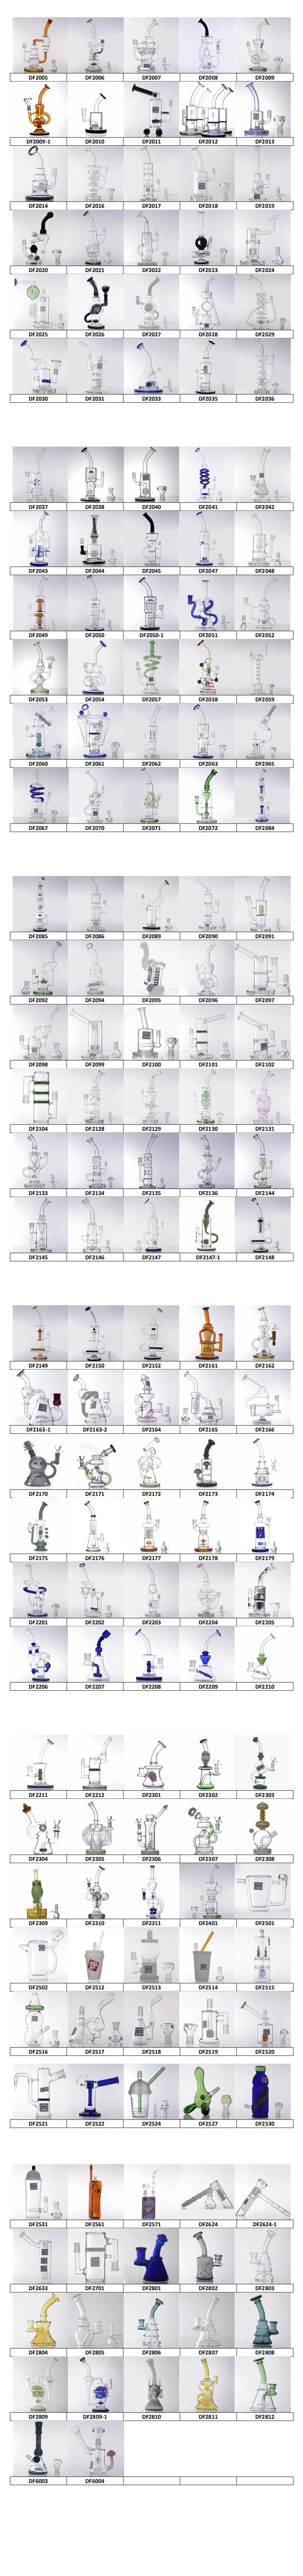 DF2029 Glass Hookah Hose Bottle Smoking Pipe Glass Bowl Water Pipes